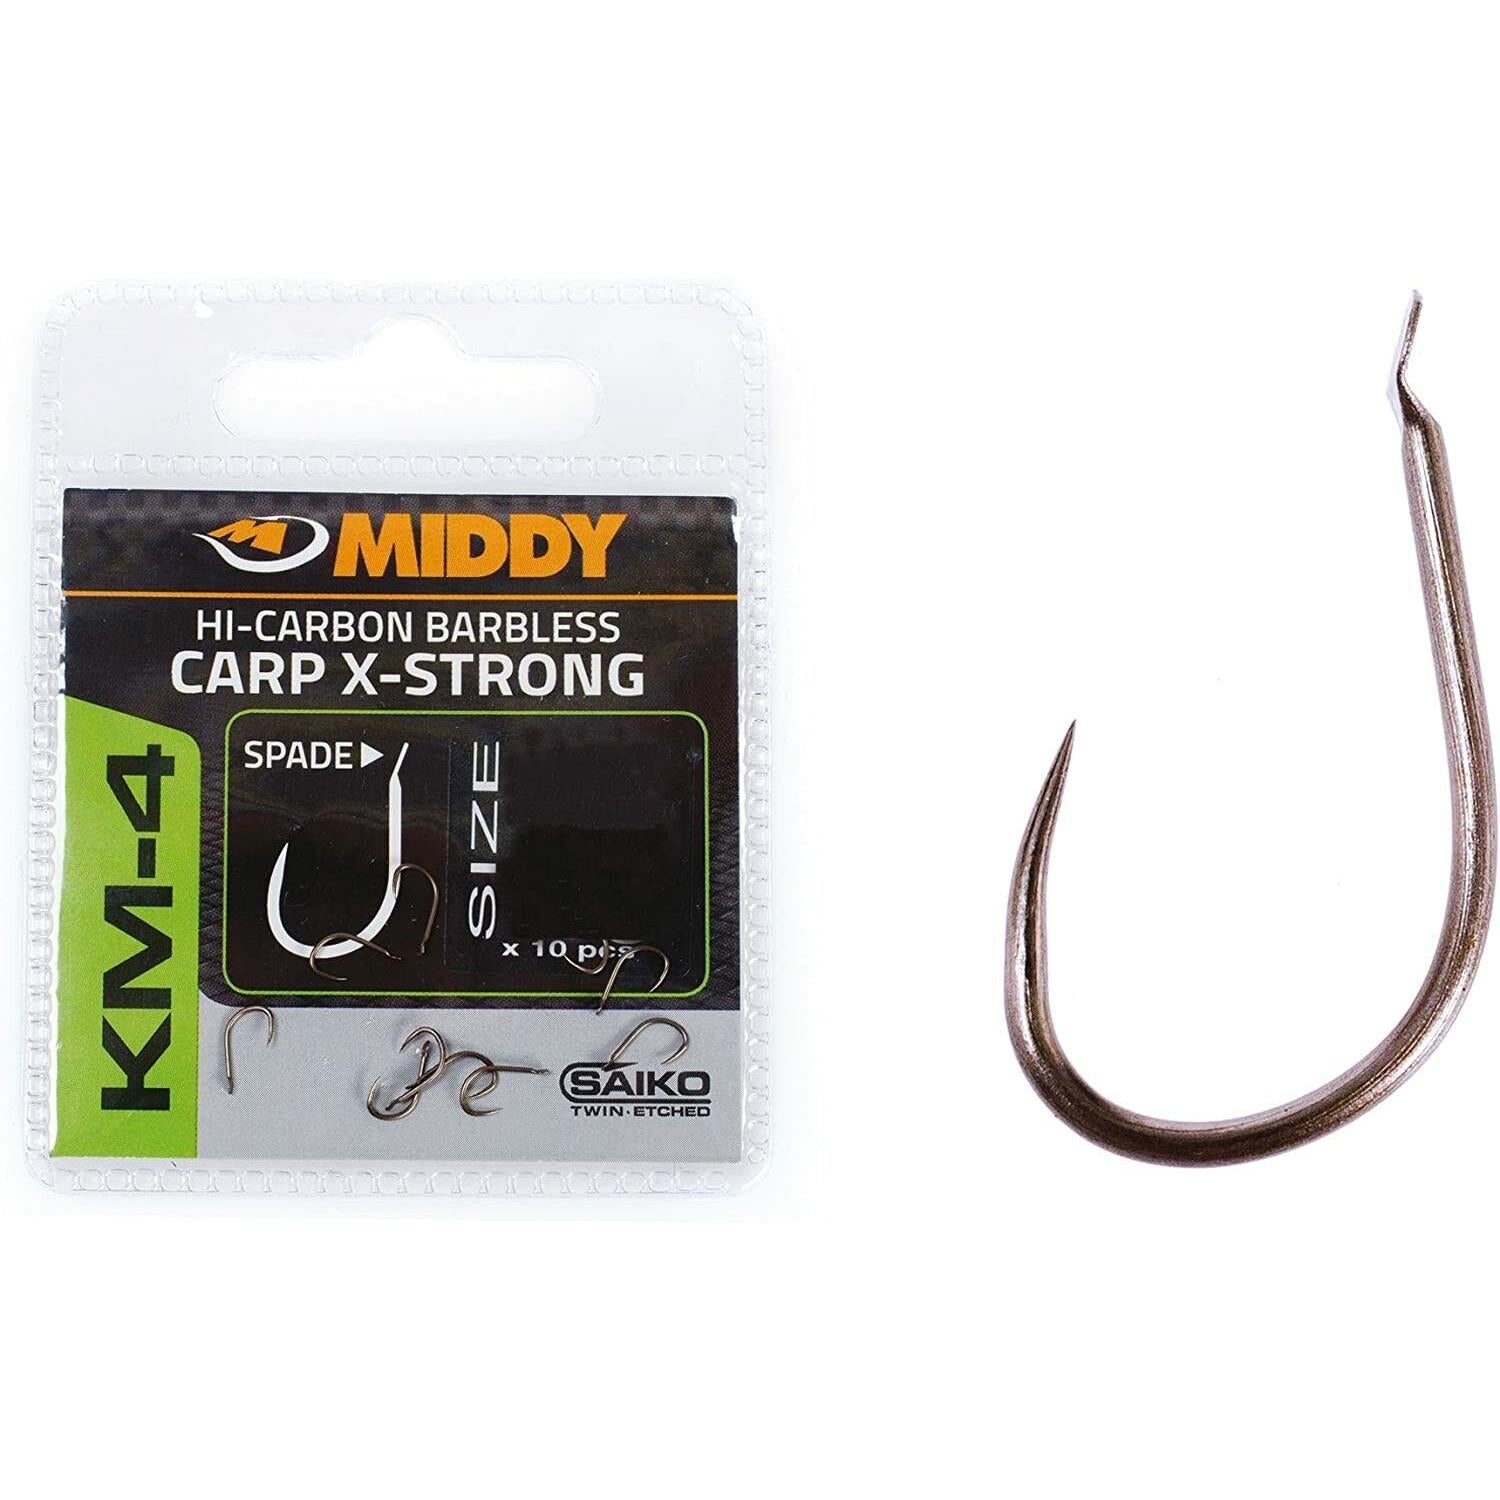 Middy KM-4 Hi-Carbon Barbless Hooks Spade End X-Strong Carp